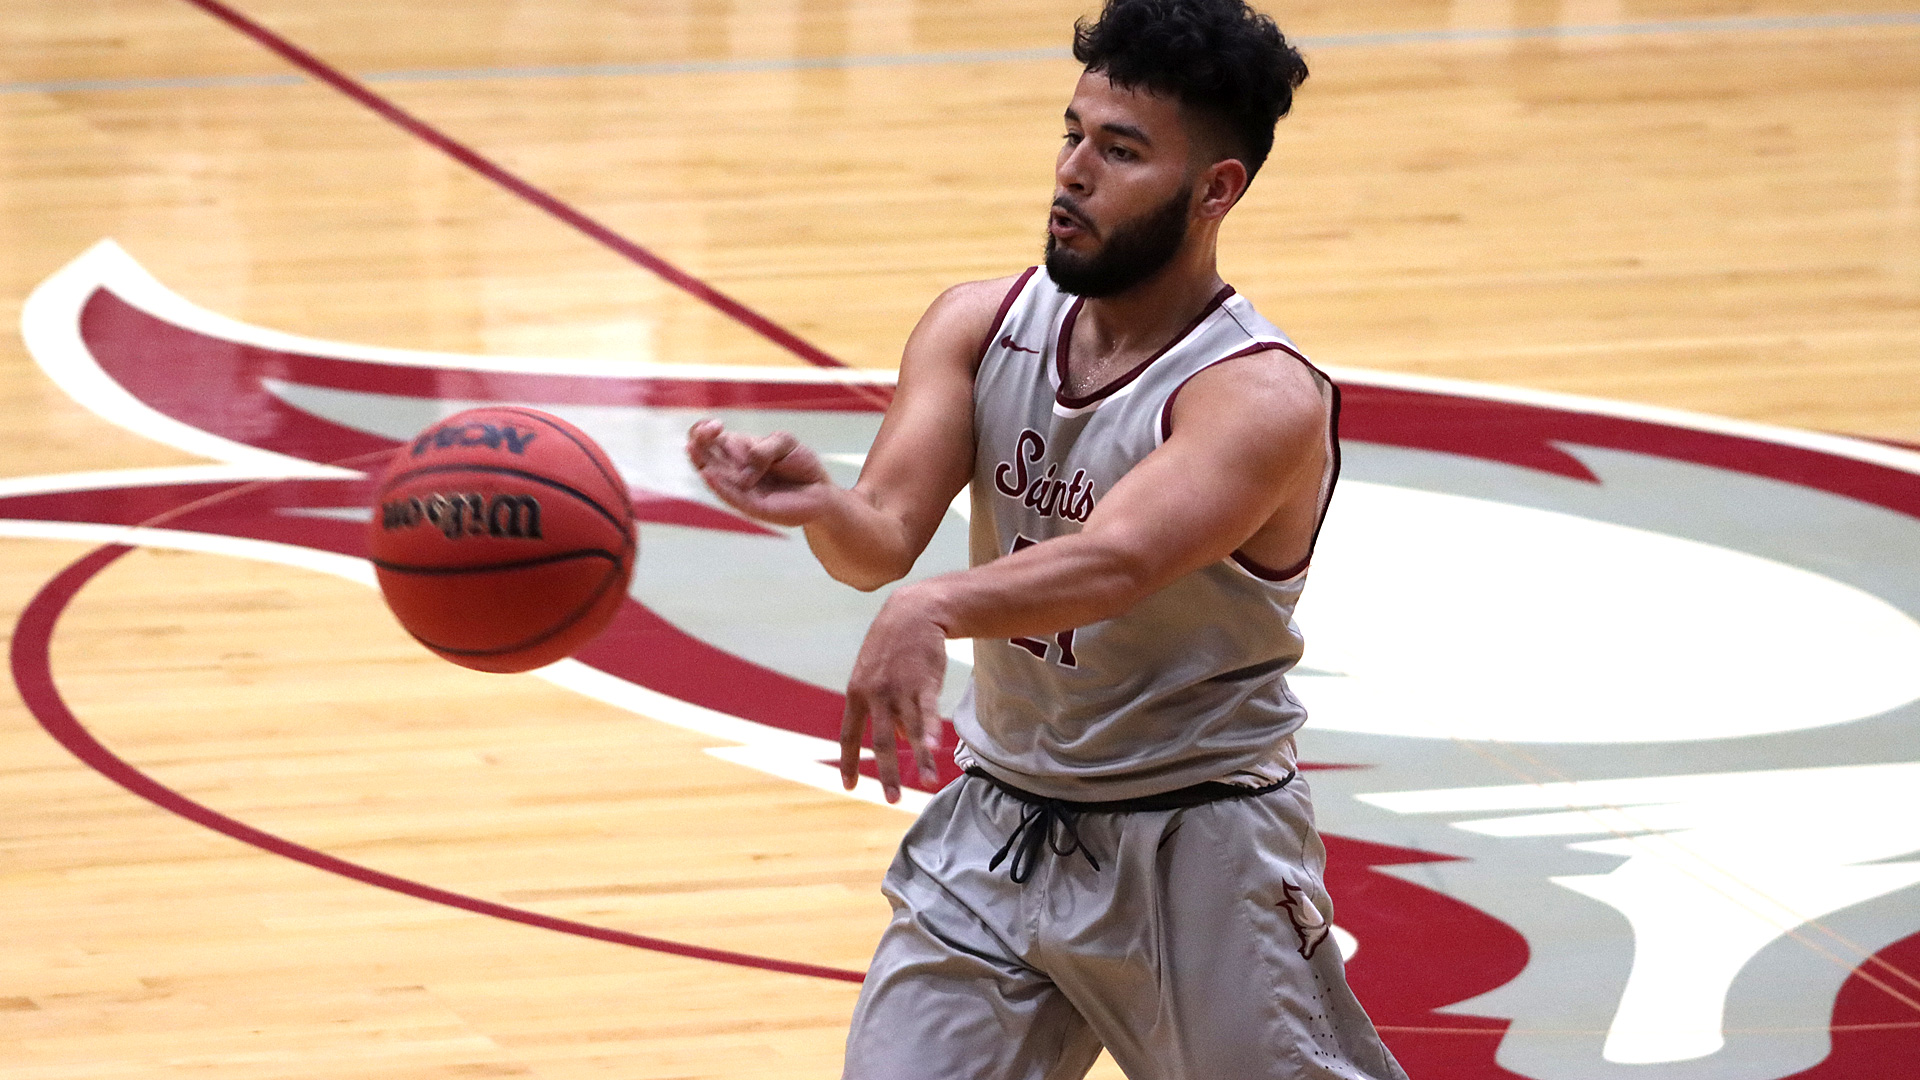 CCCB senior Cruz Mendoza scored two points and dished out two assists during the Saints' 81-75 victory over Spurgeon College on Monday night.